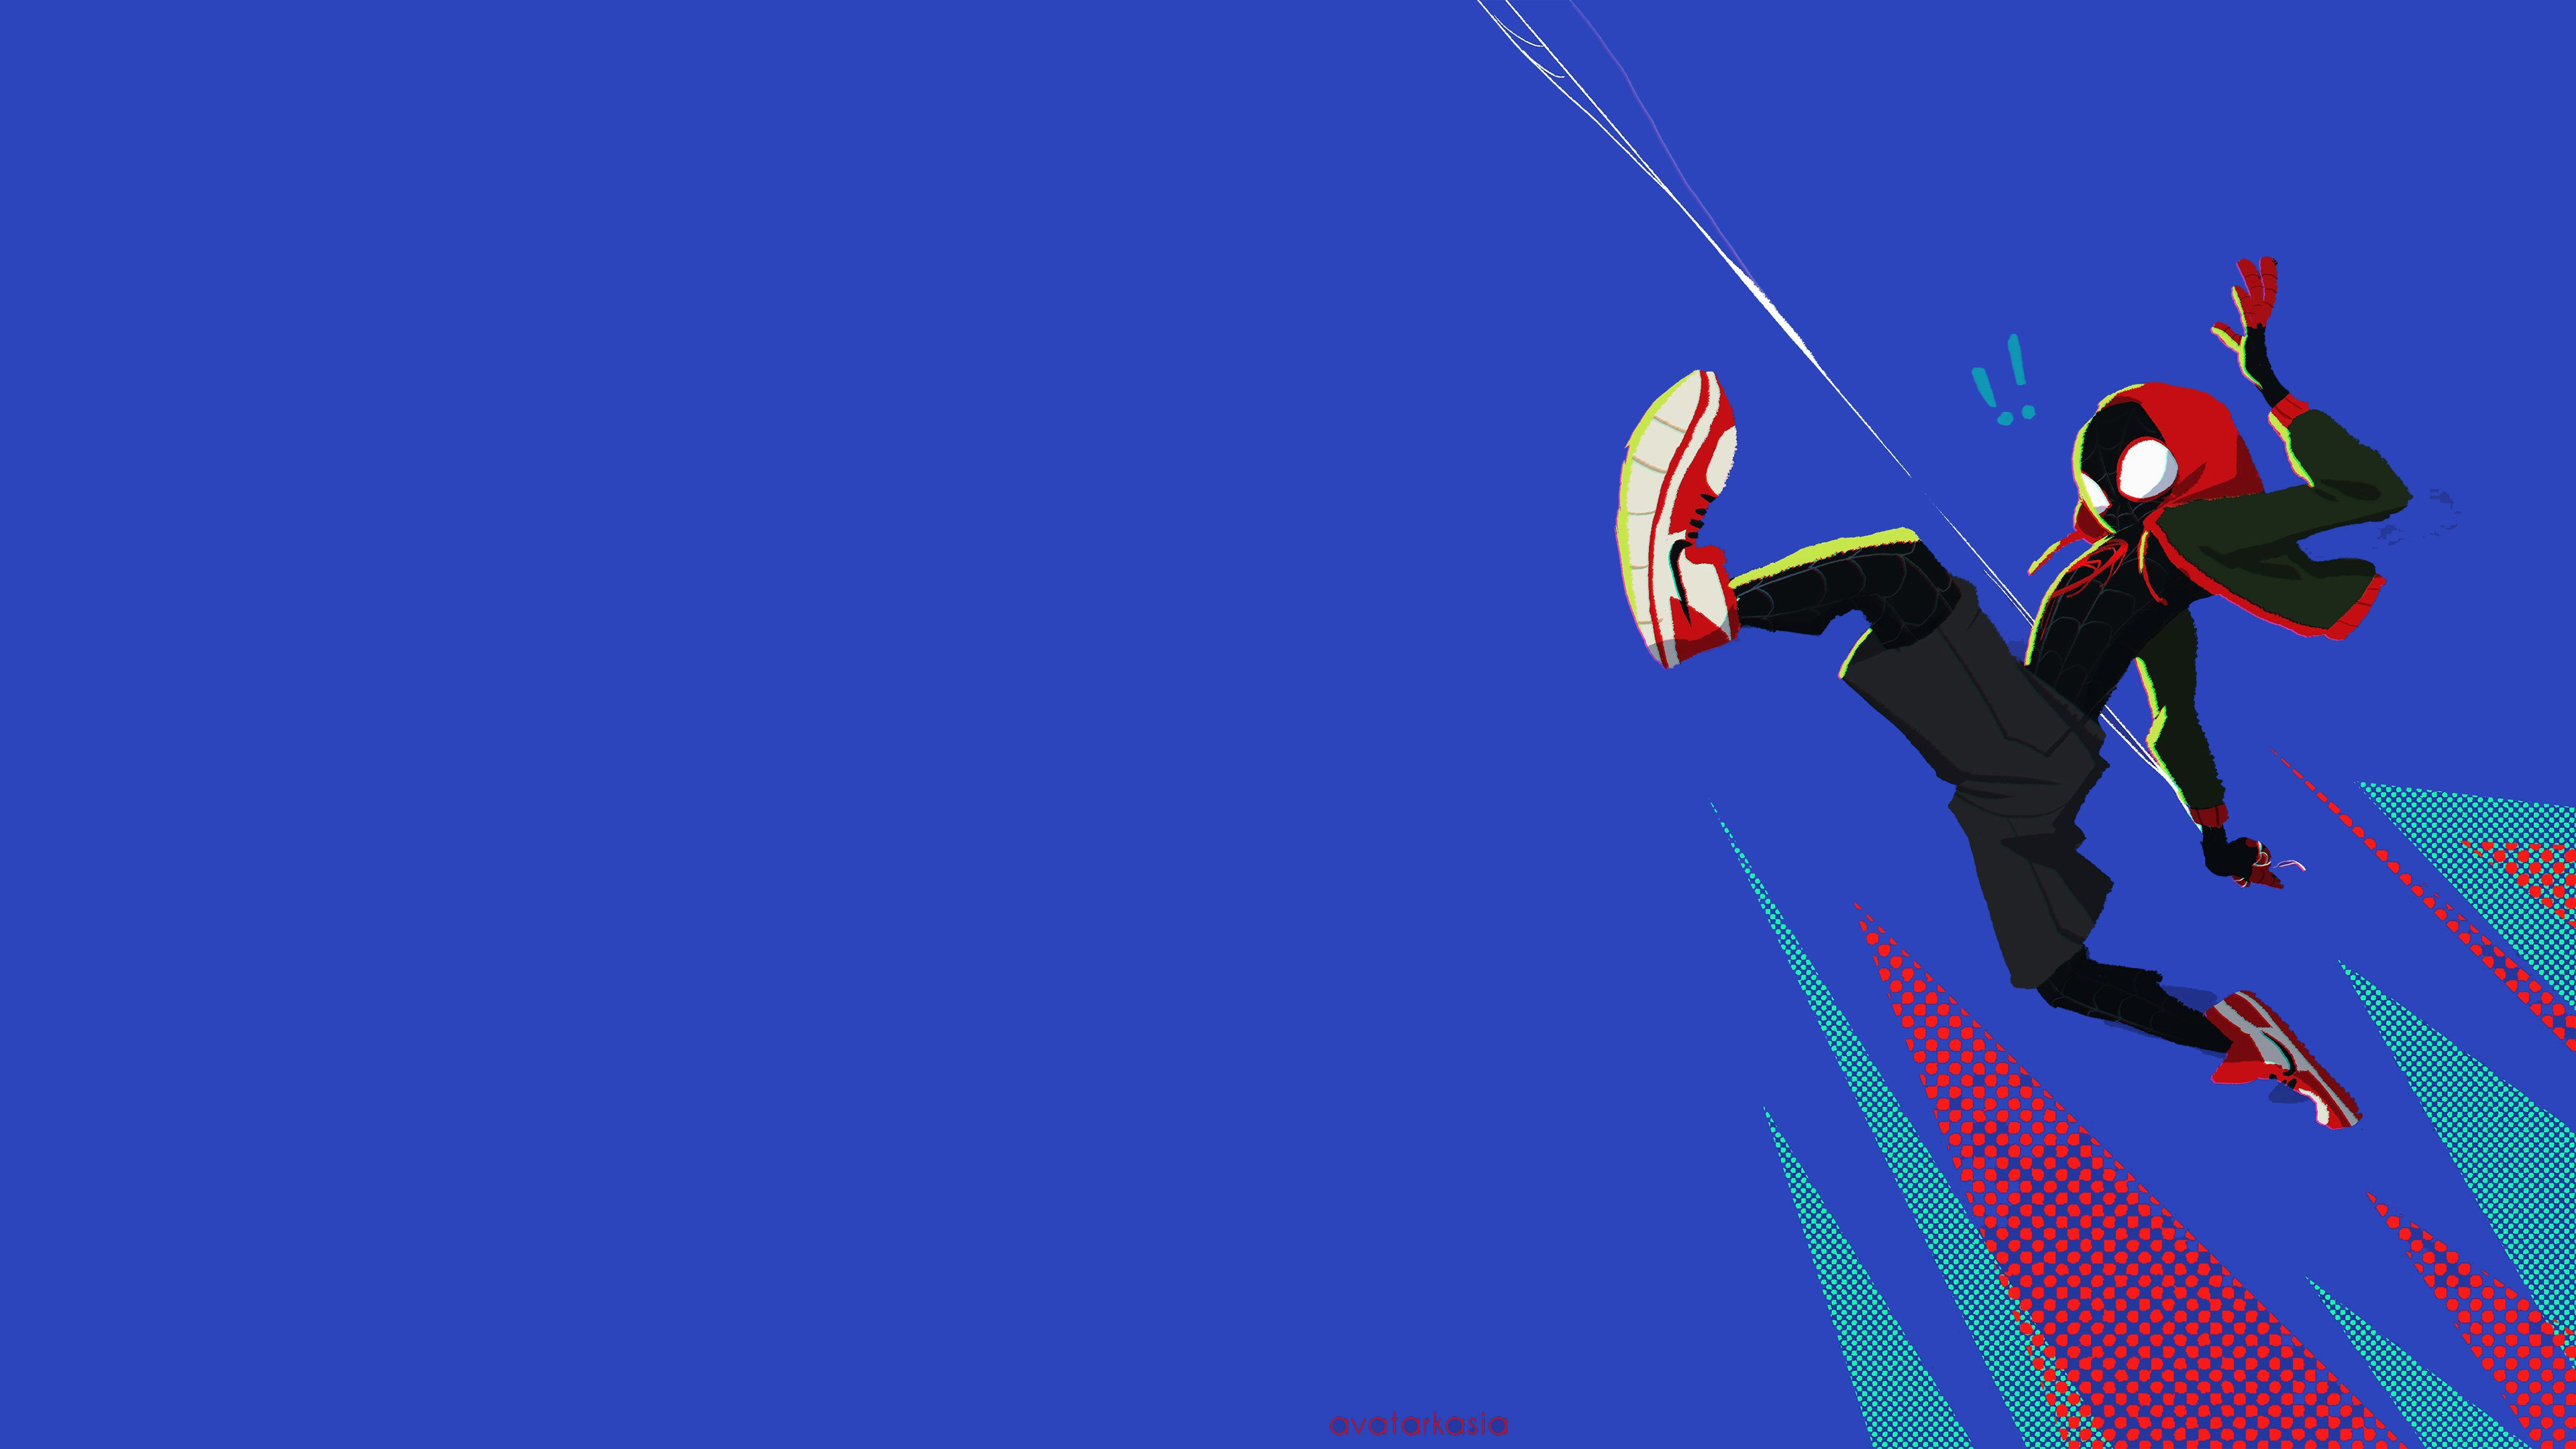 2560x1440 Spiderman Into The Spider Verse Movie 4k 2018 Art 1440p Resolution Hd 4k Wallpapers